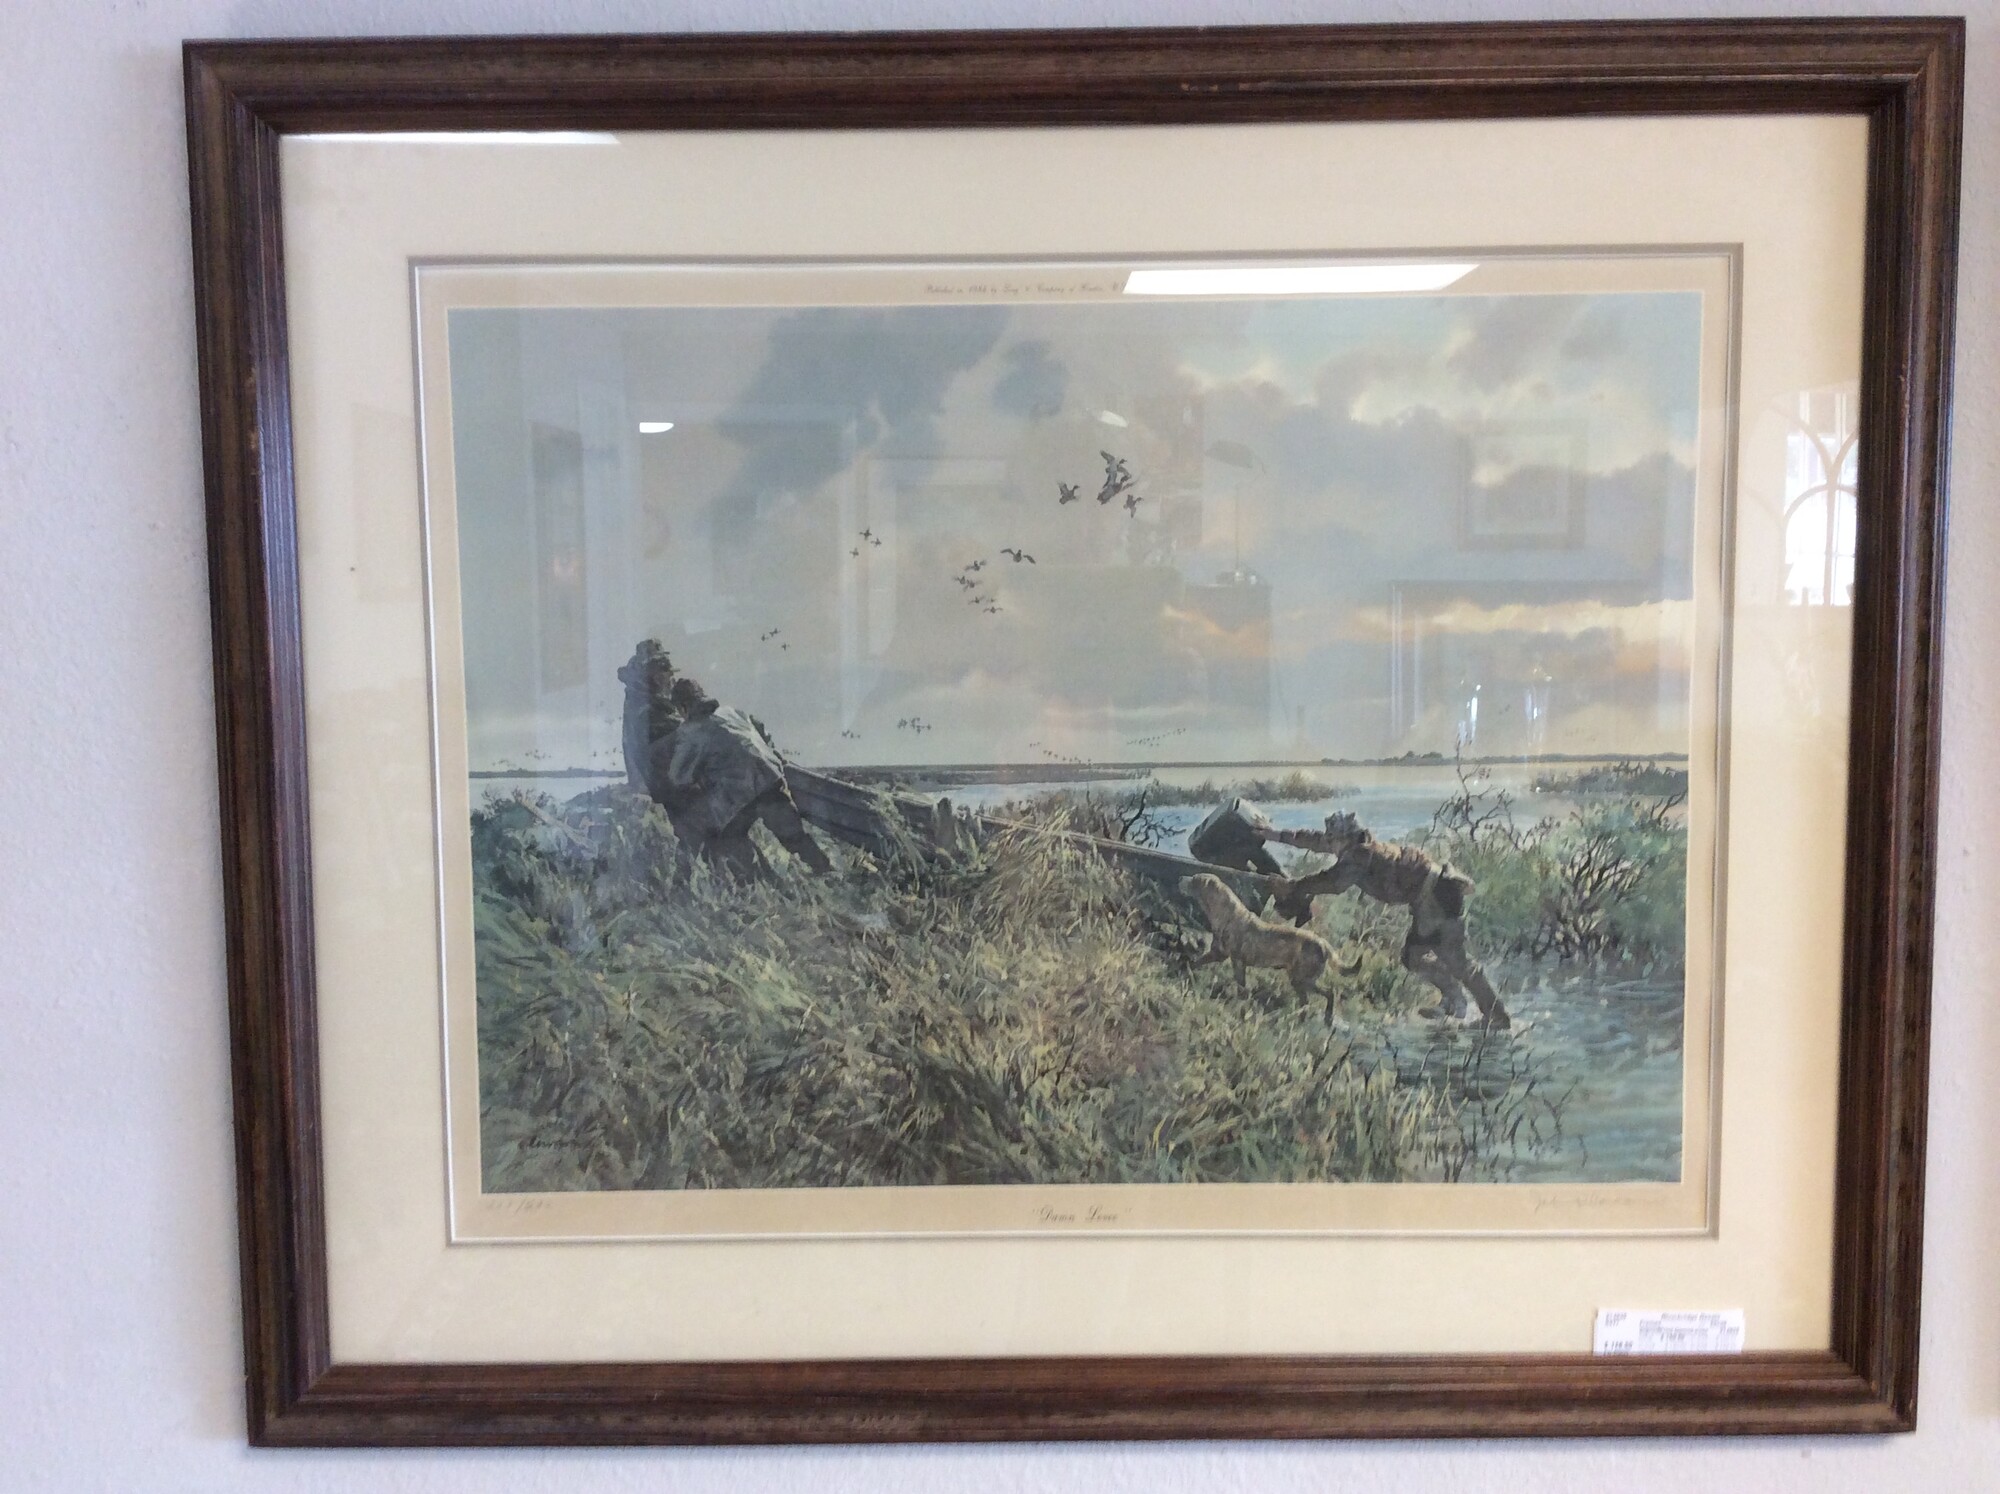 John Cowan's signed print: \"Damn Levee\" is a classic older limited edition Cowan art print depicting duck hunting scene with yellow lab Hunter Texas Gulf Coast.